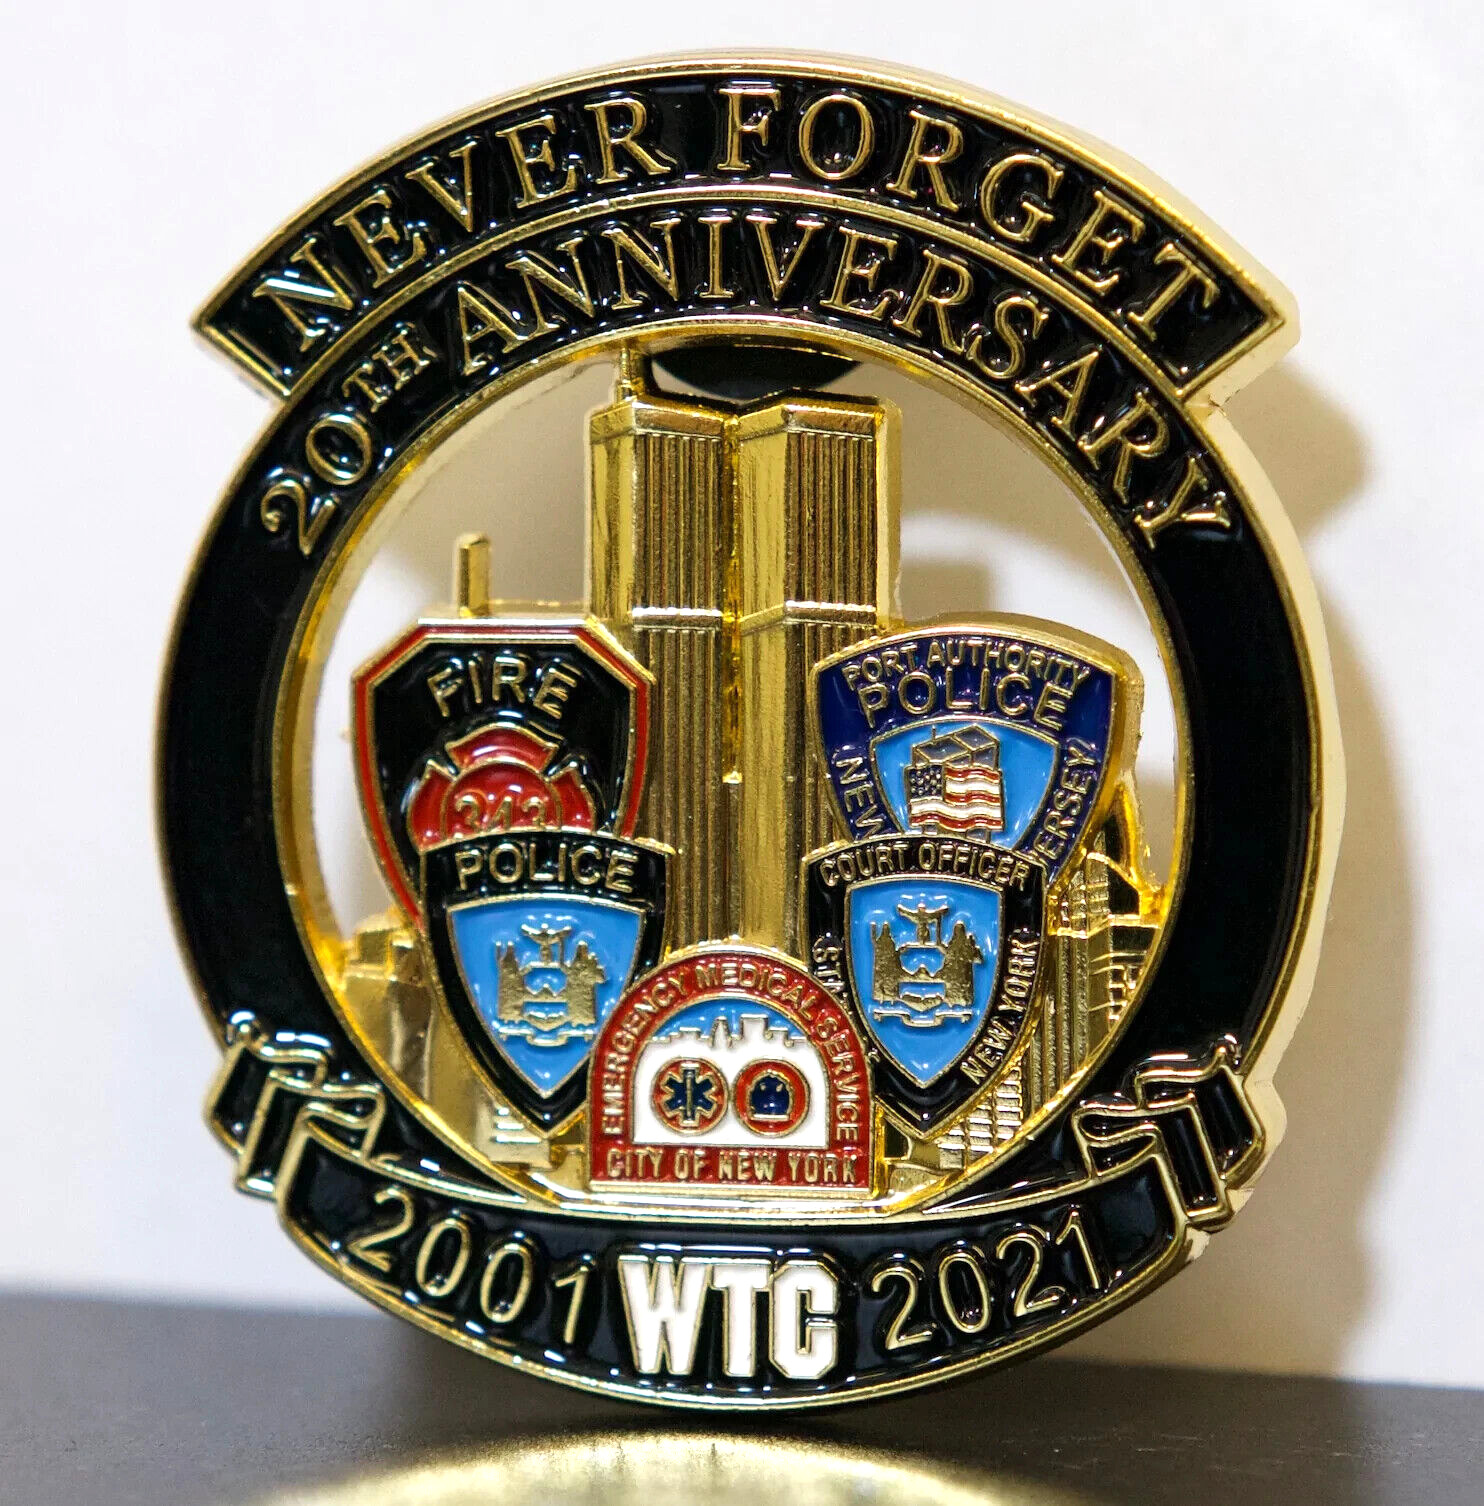 LIMITED EDITION 9-11 20TH ANNIVER.  NEVER FORGET WTC 2001-2021 COMMEMORATIVE PIN